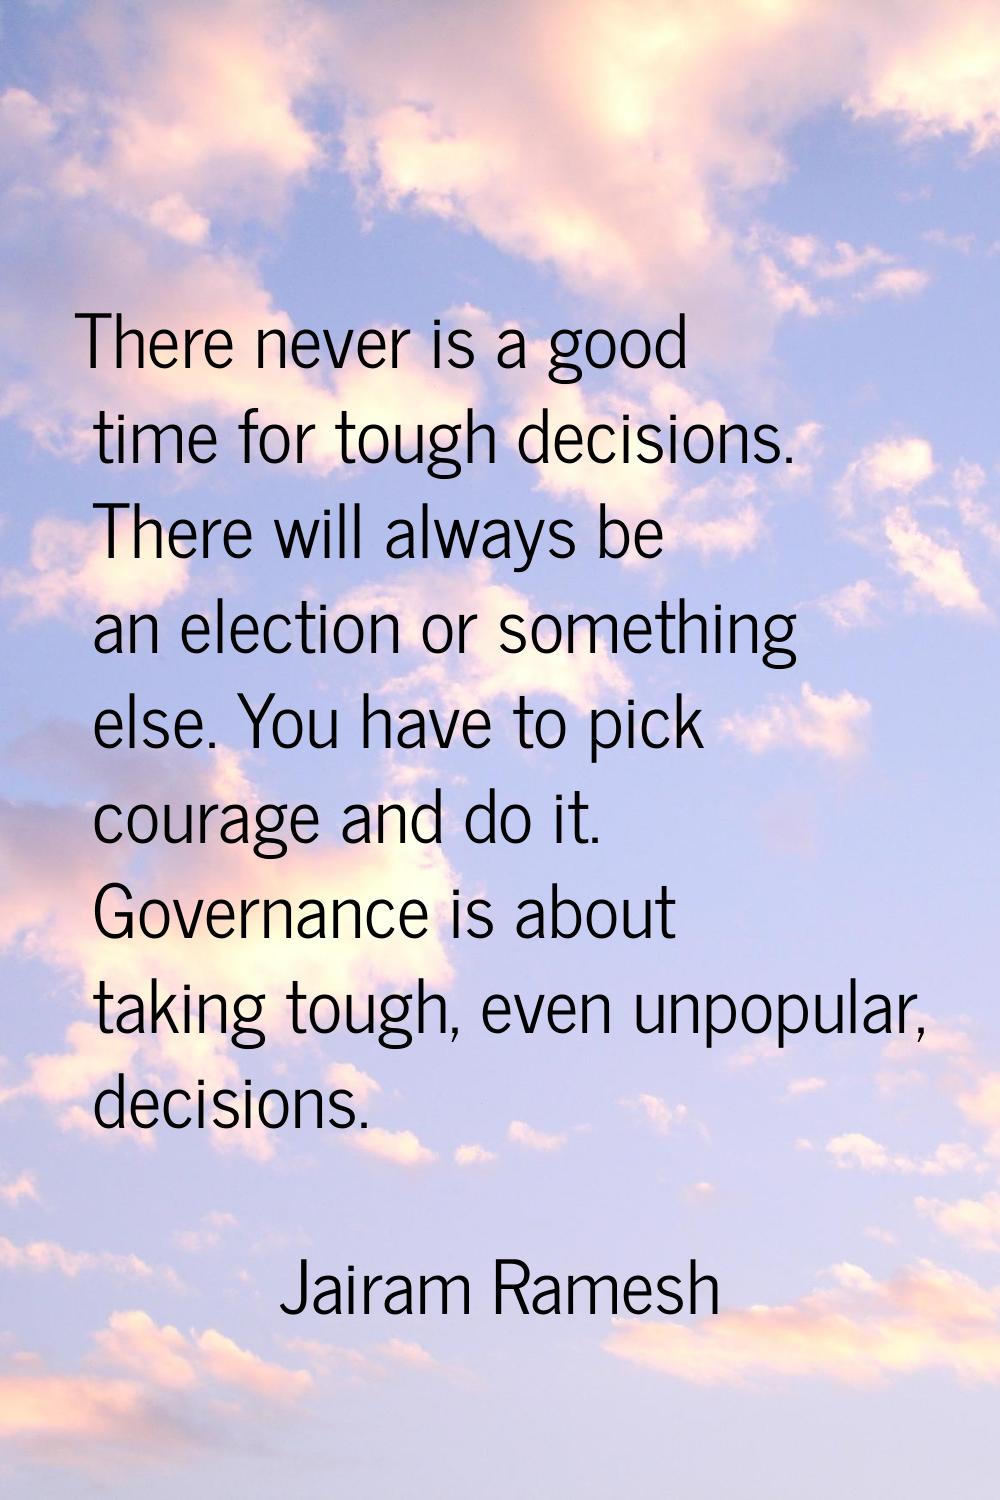 There never is a good time for tough decisions. There will always be an election or something else.